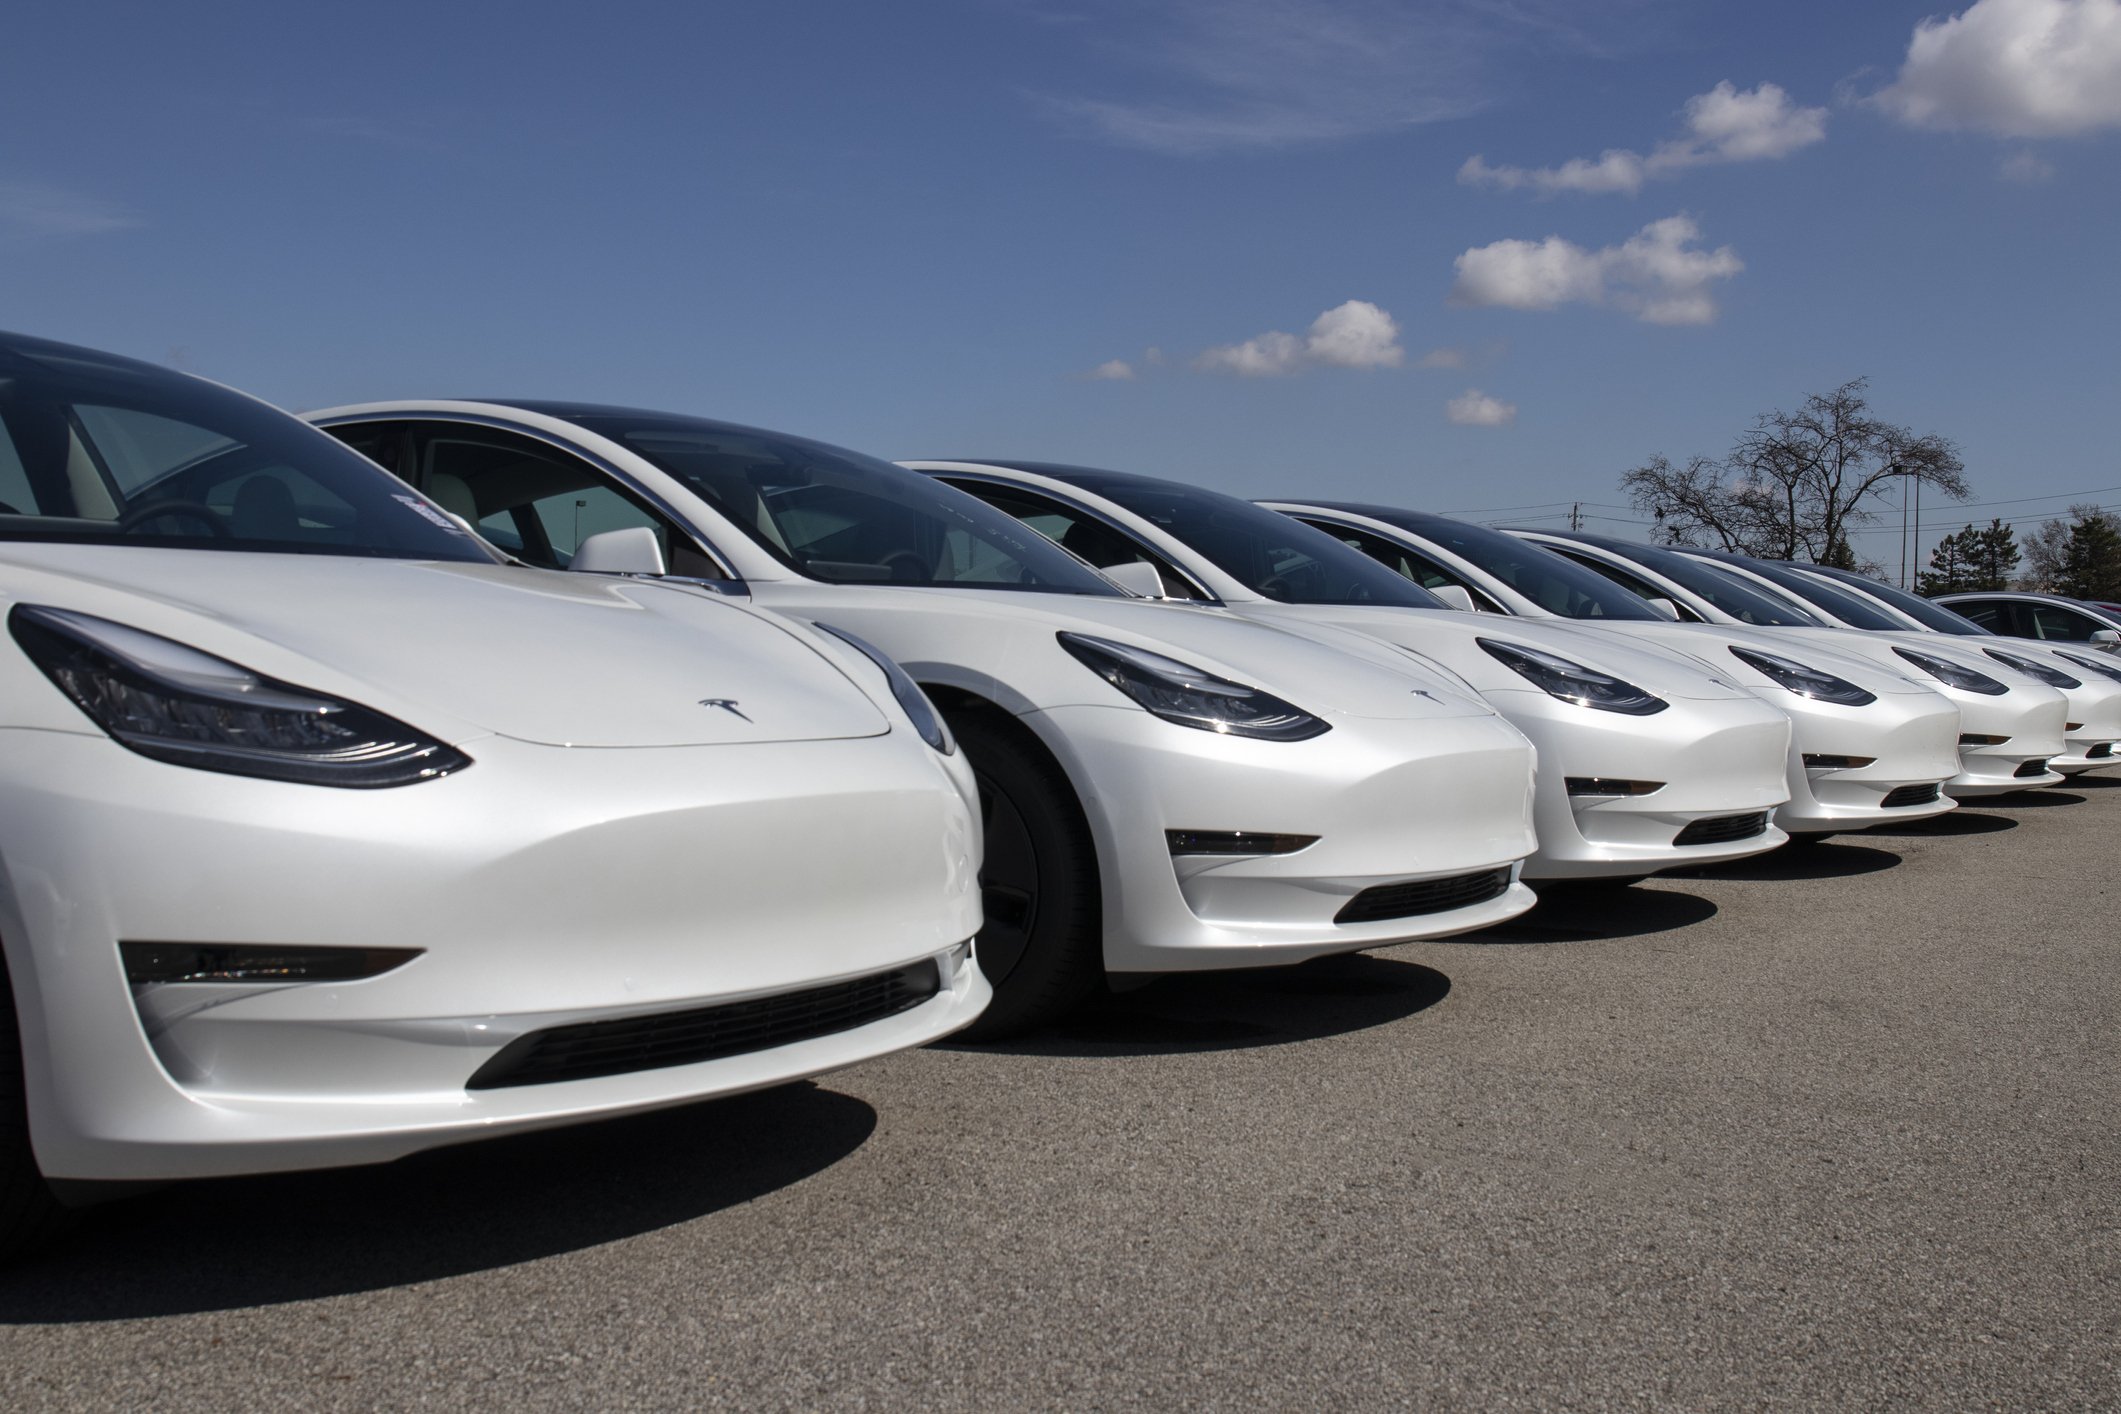 No more Teslas in California? It’s possible, but not likely.